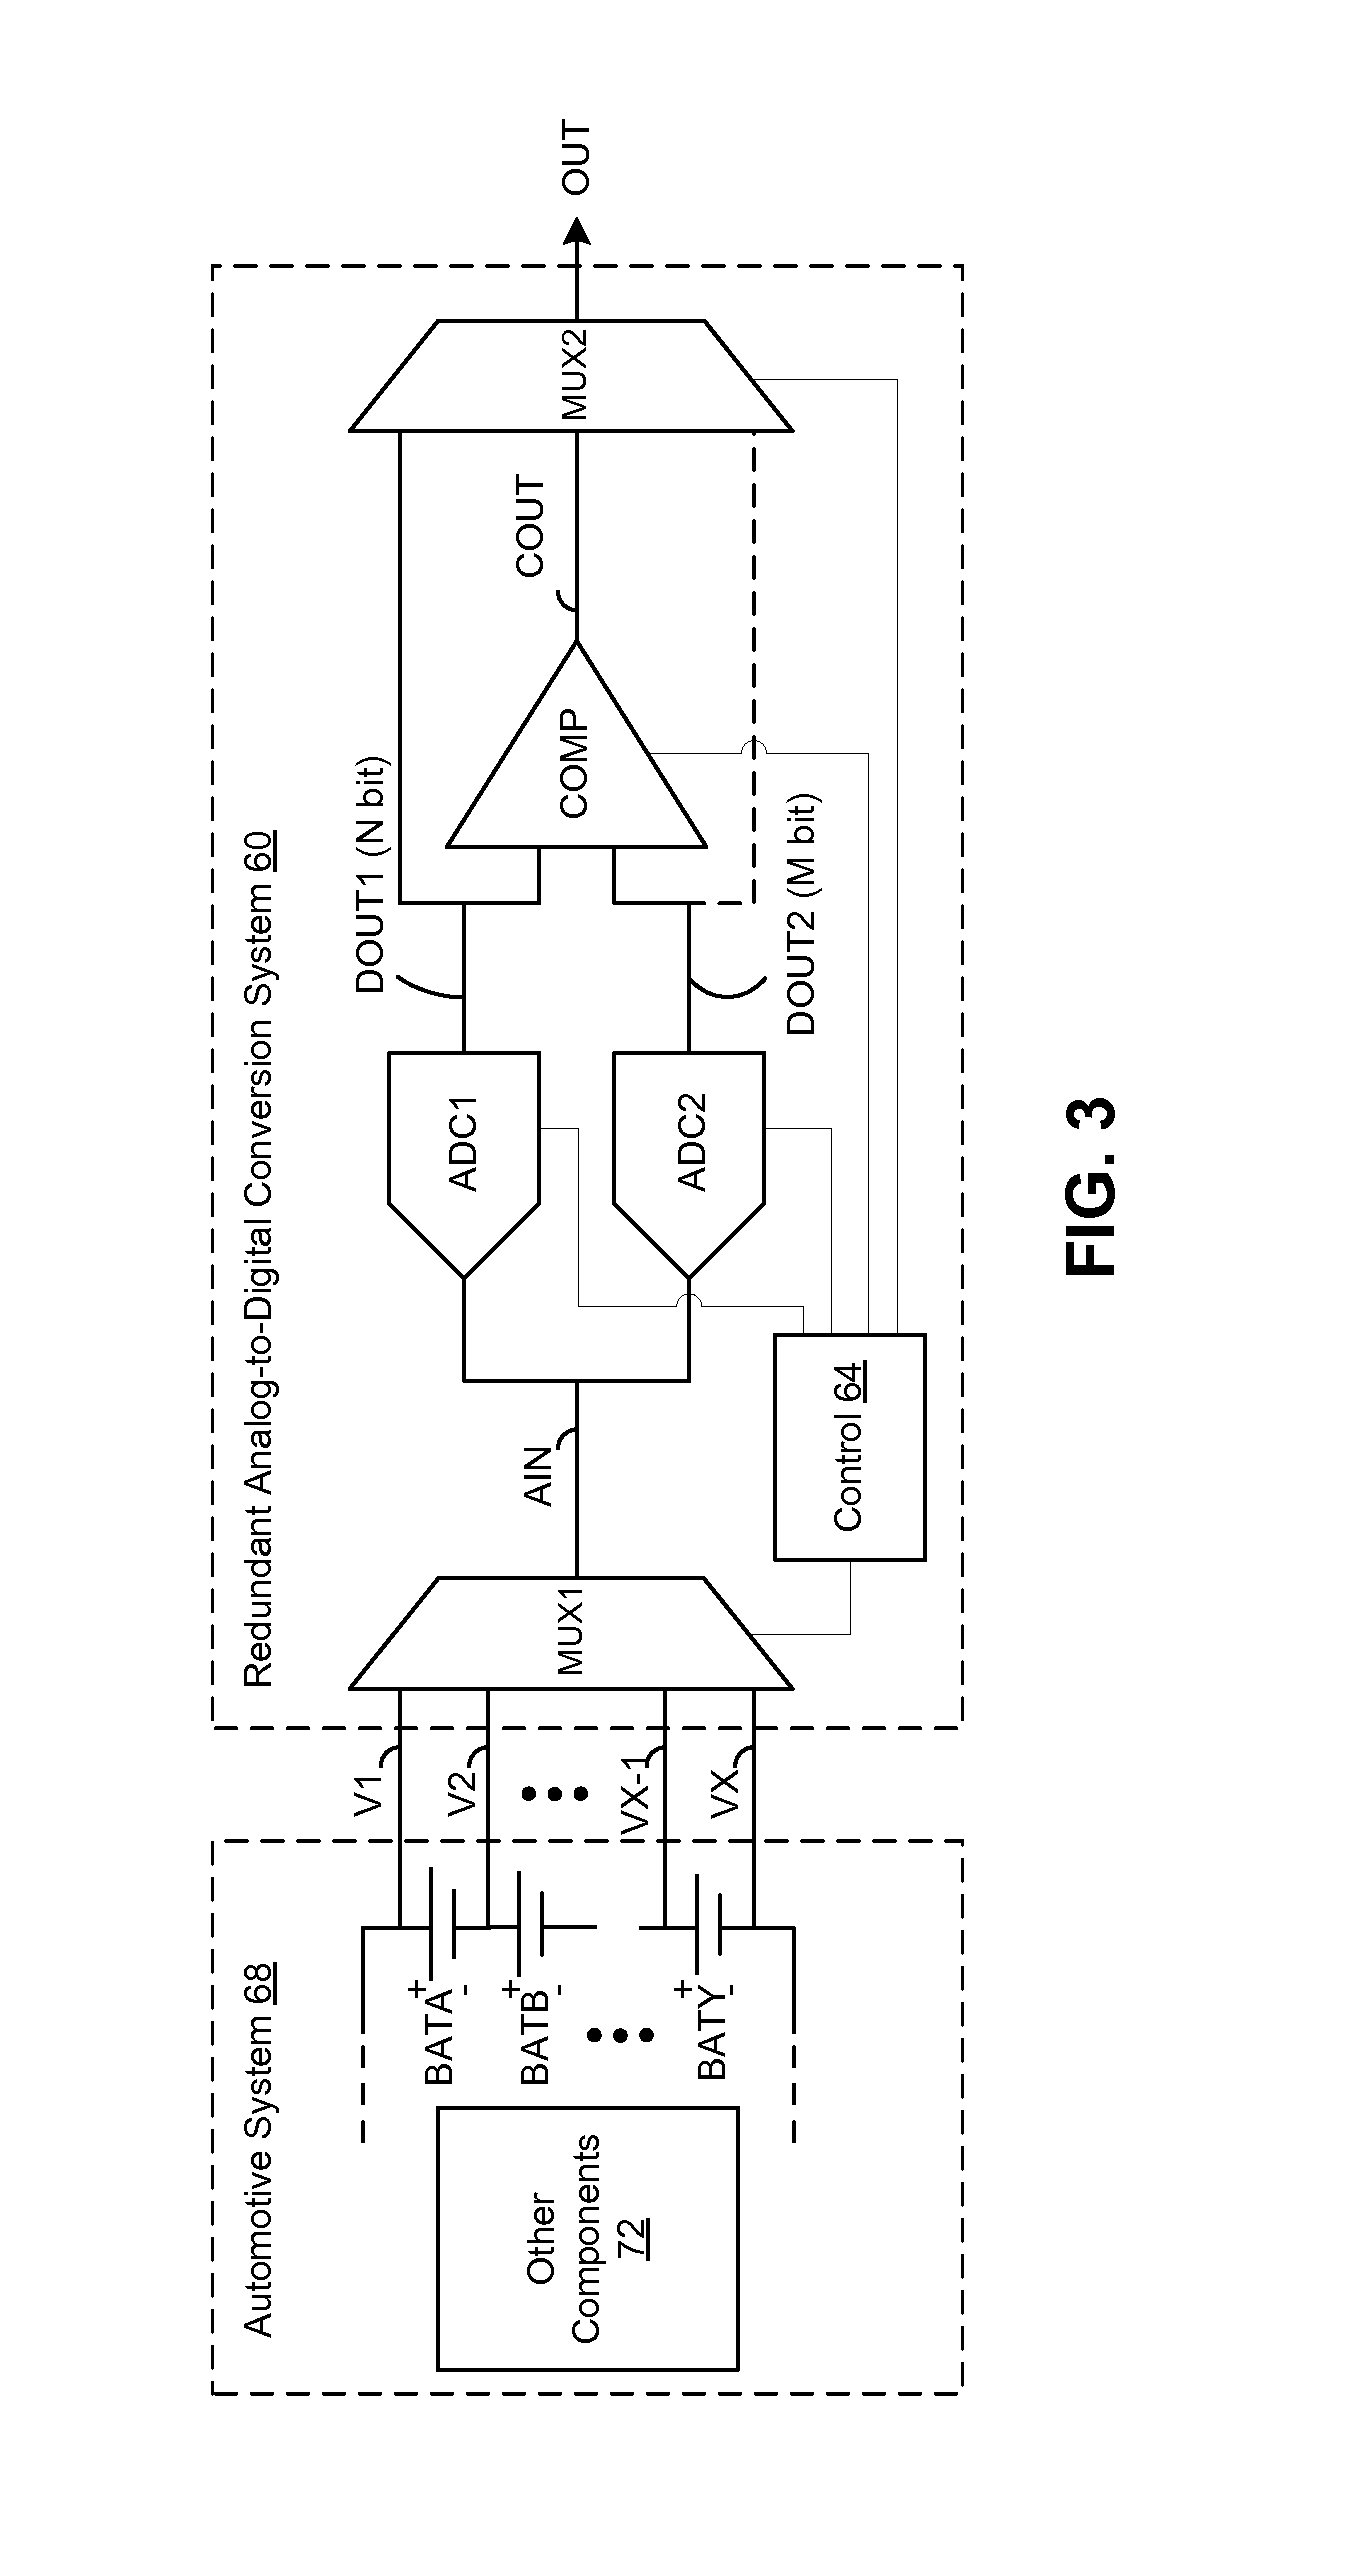 Test circuits and methods for redundant electronic systems